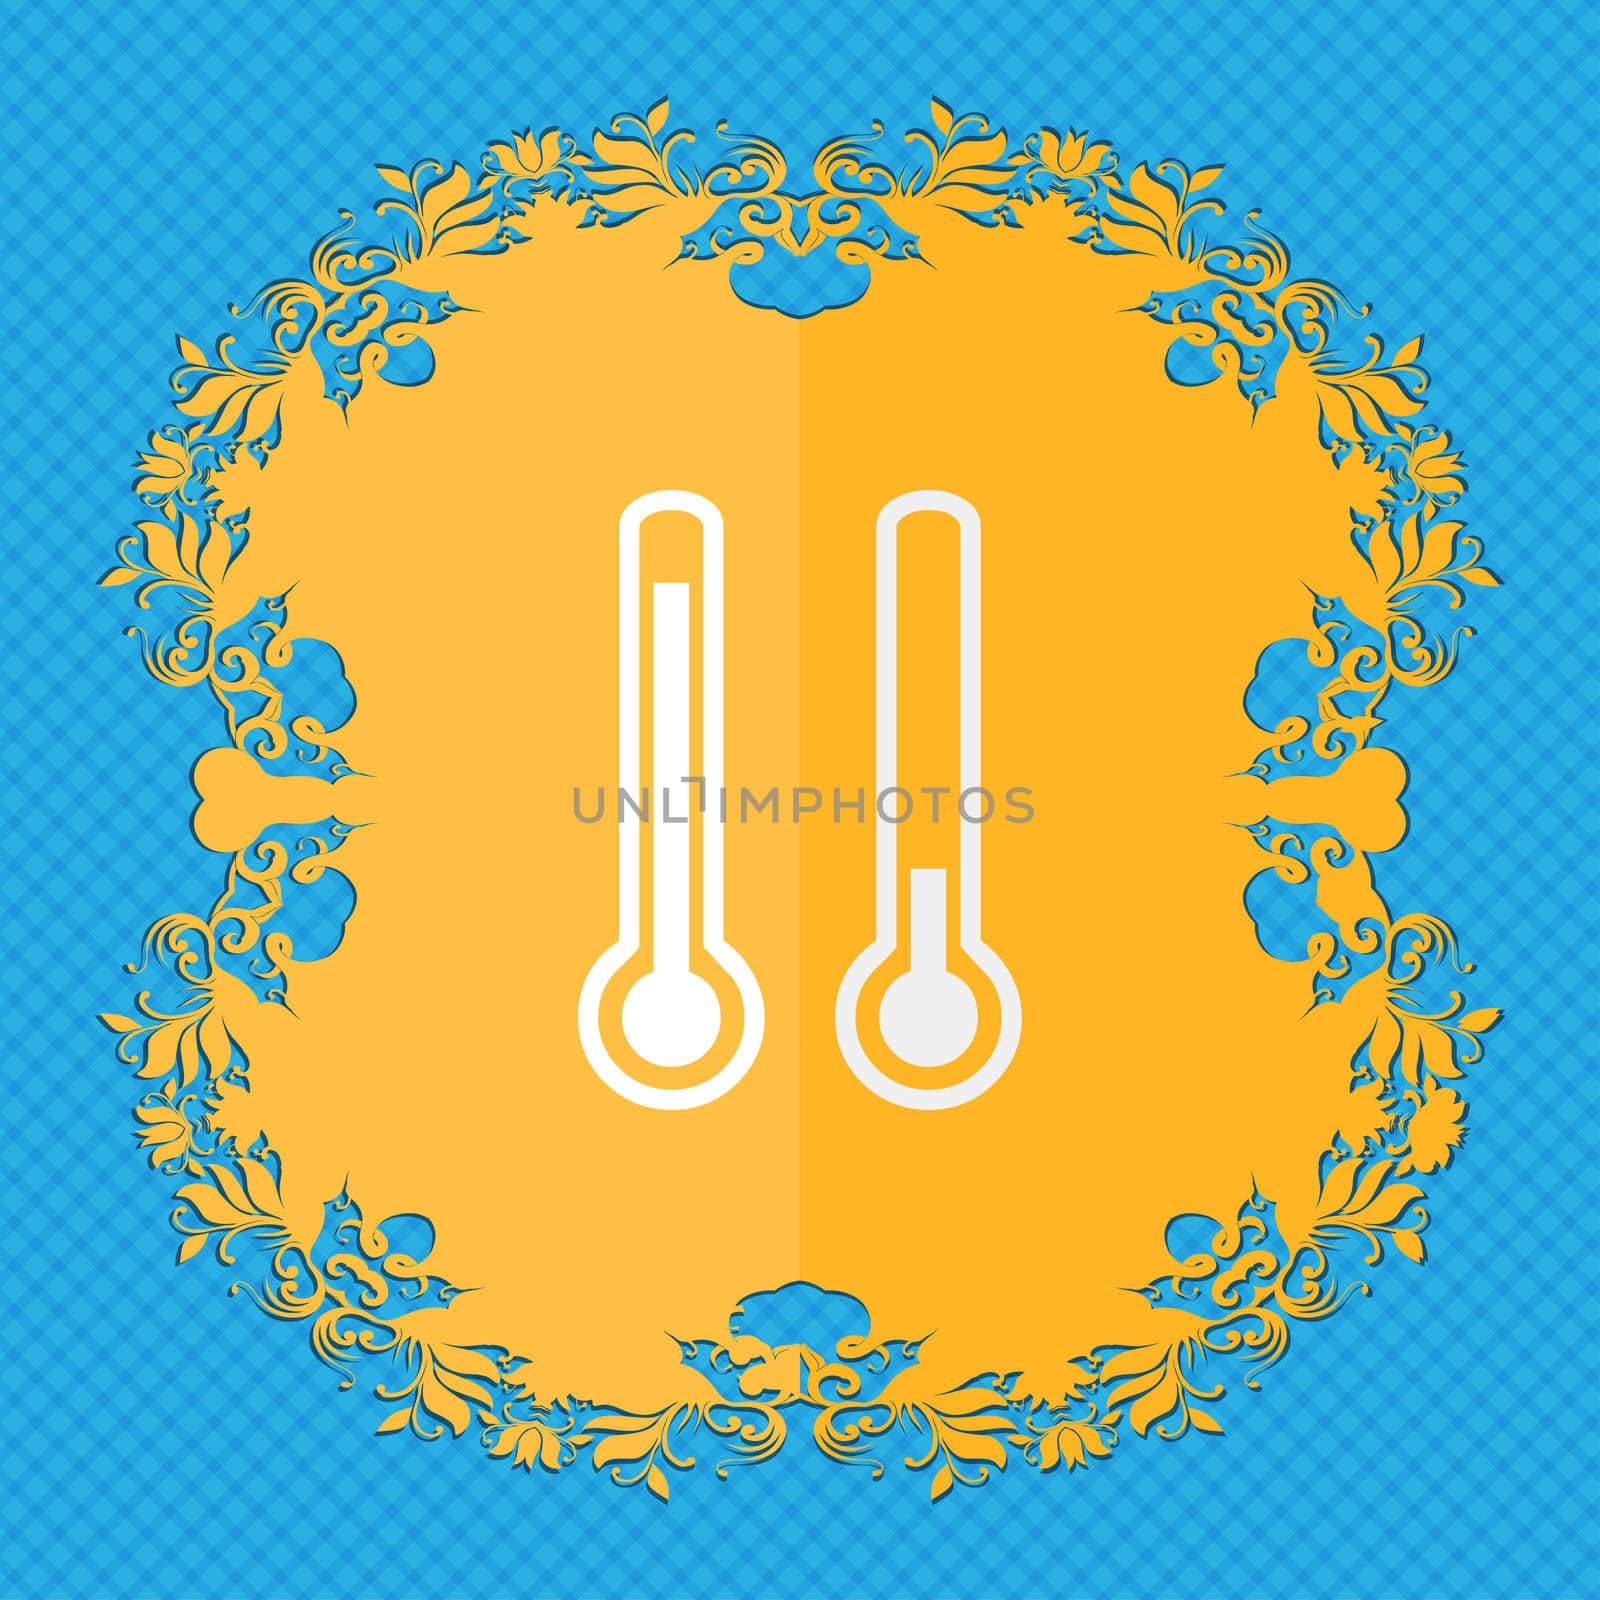 thermometer temperature. Floral flat design on a blue abstract background with place for your text. illustration